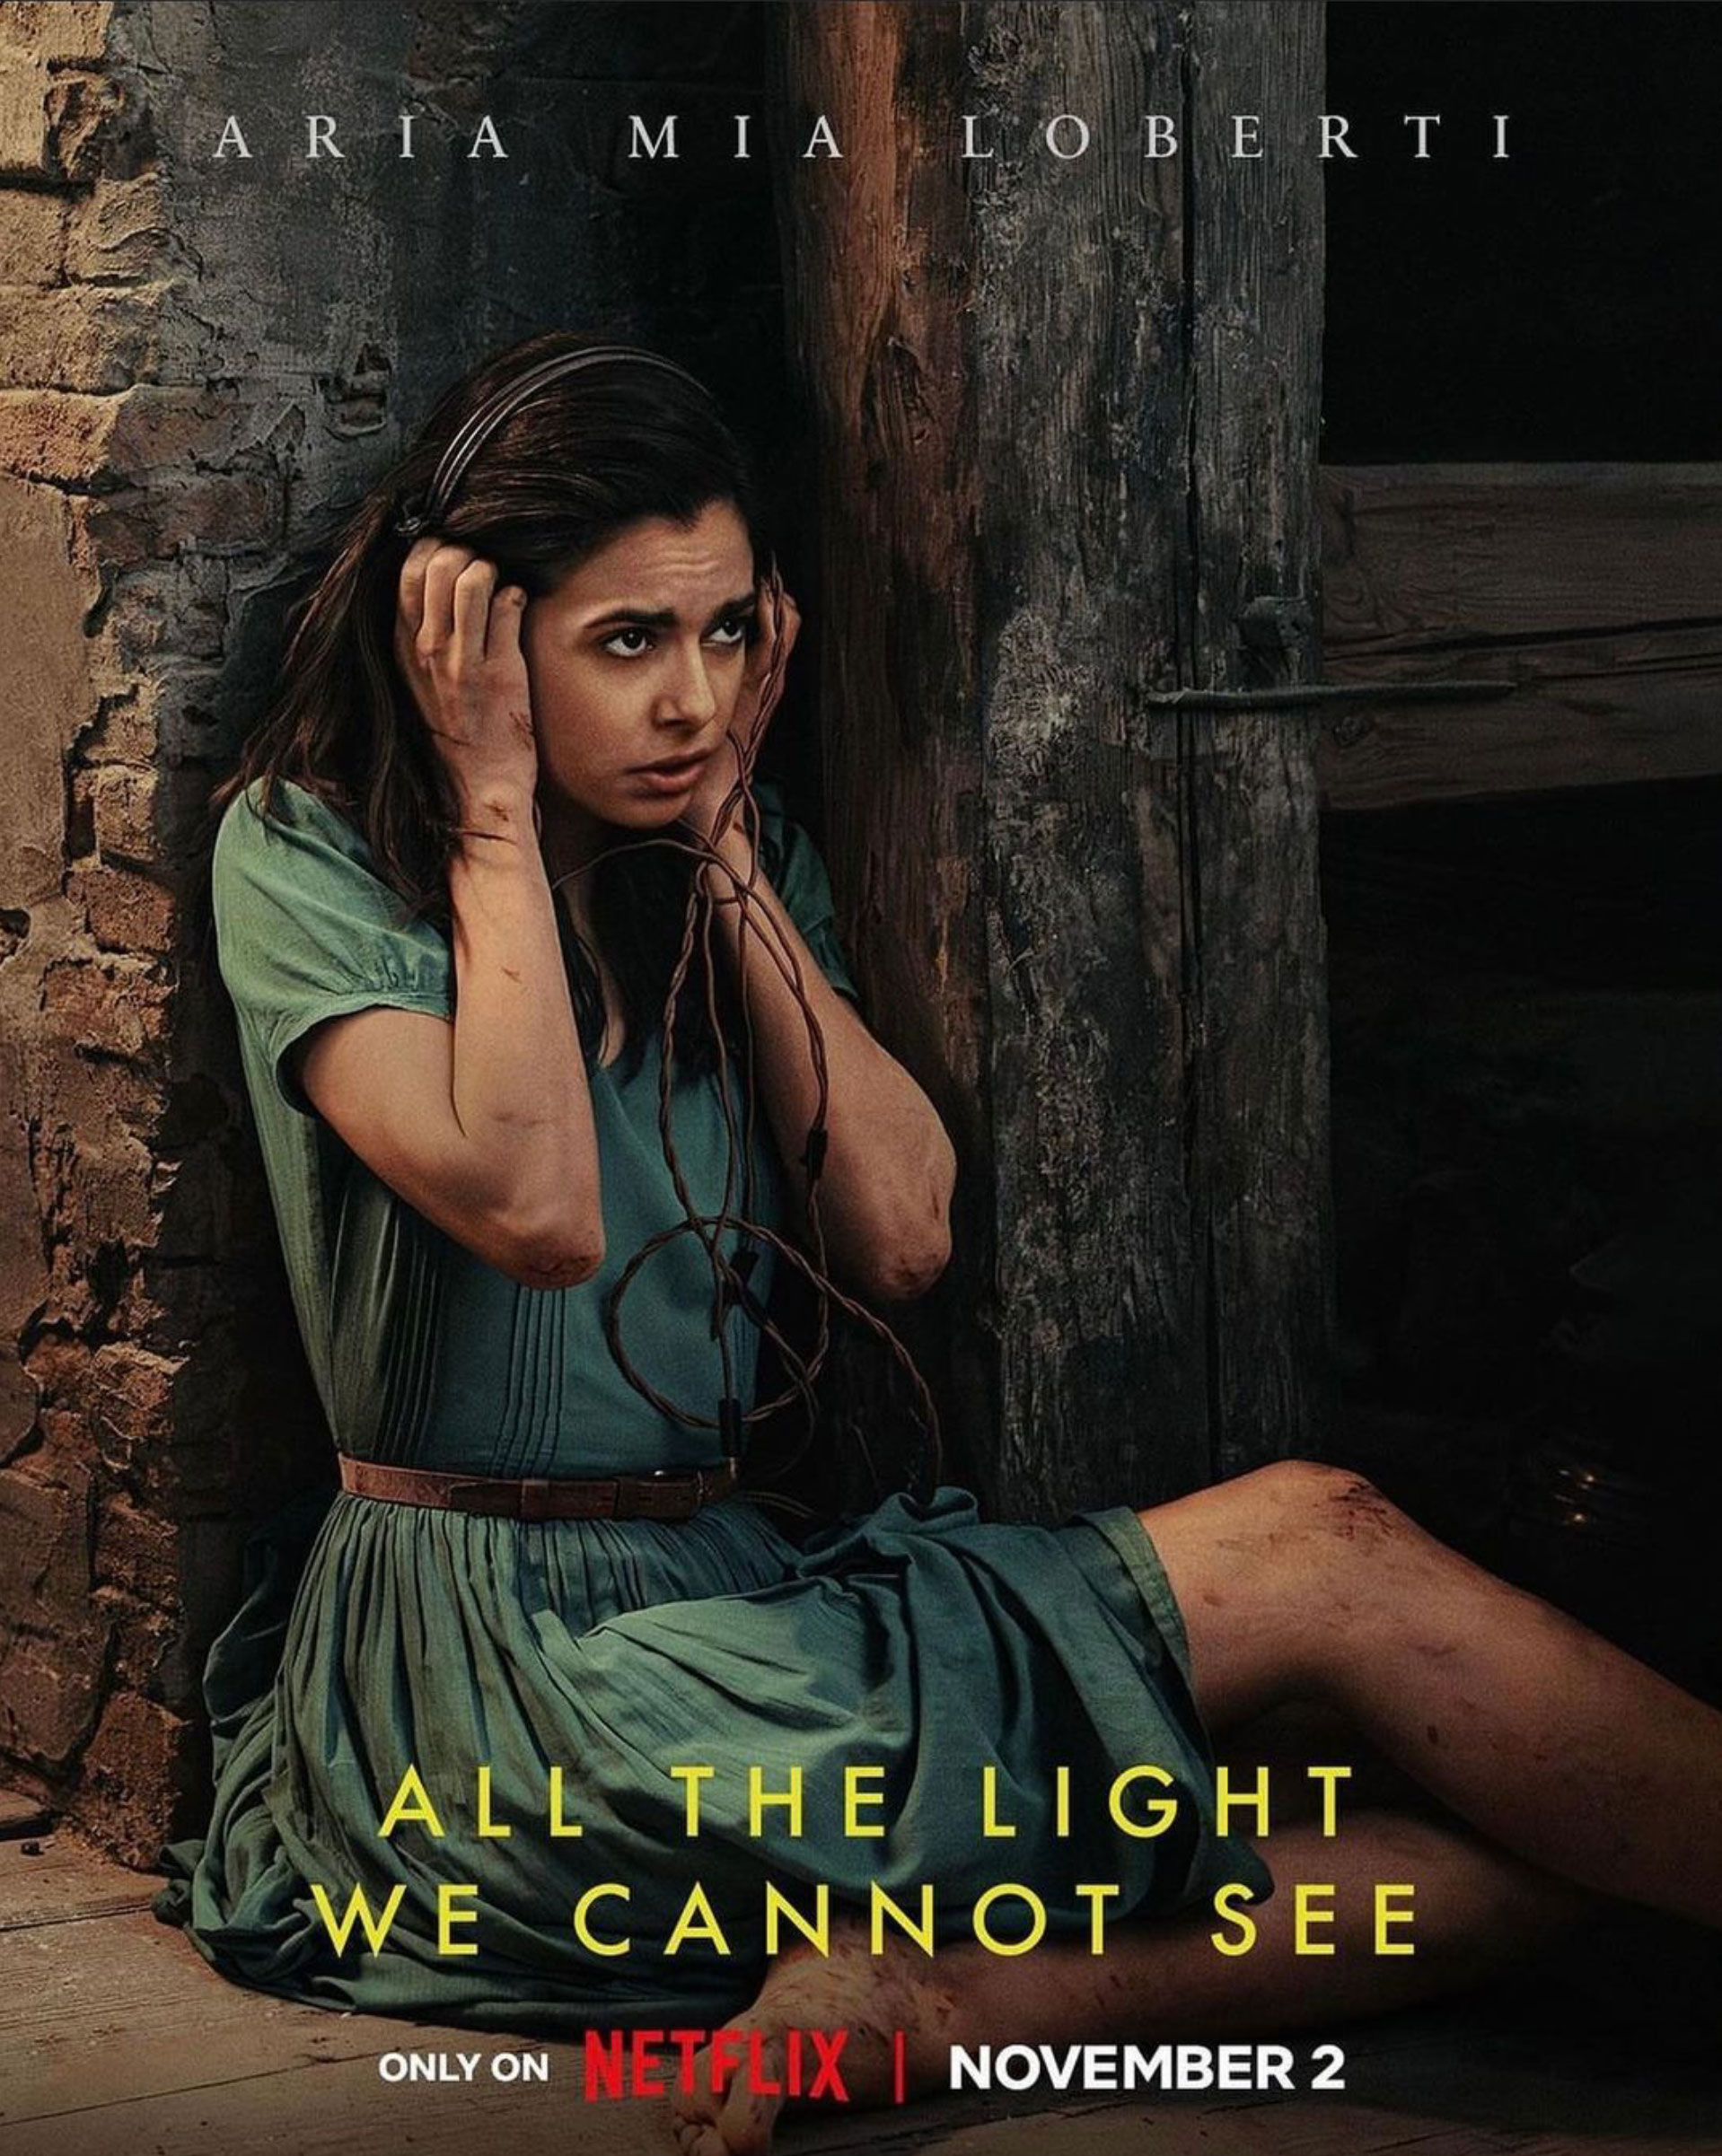 Netflix All the Light We Cannot See promo photo featuring Loberti